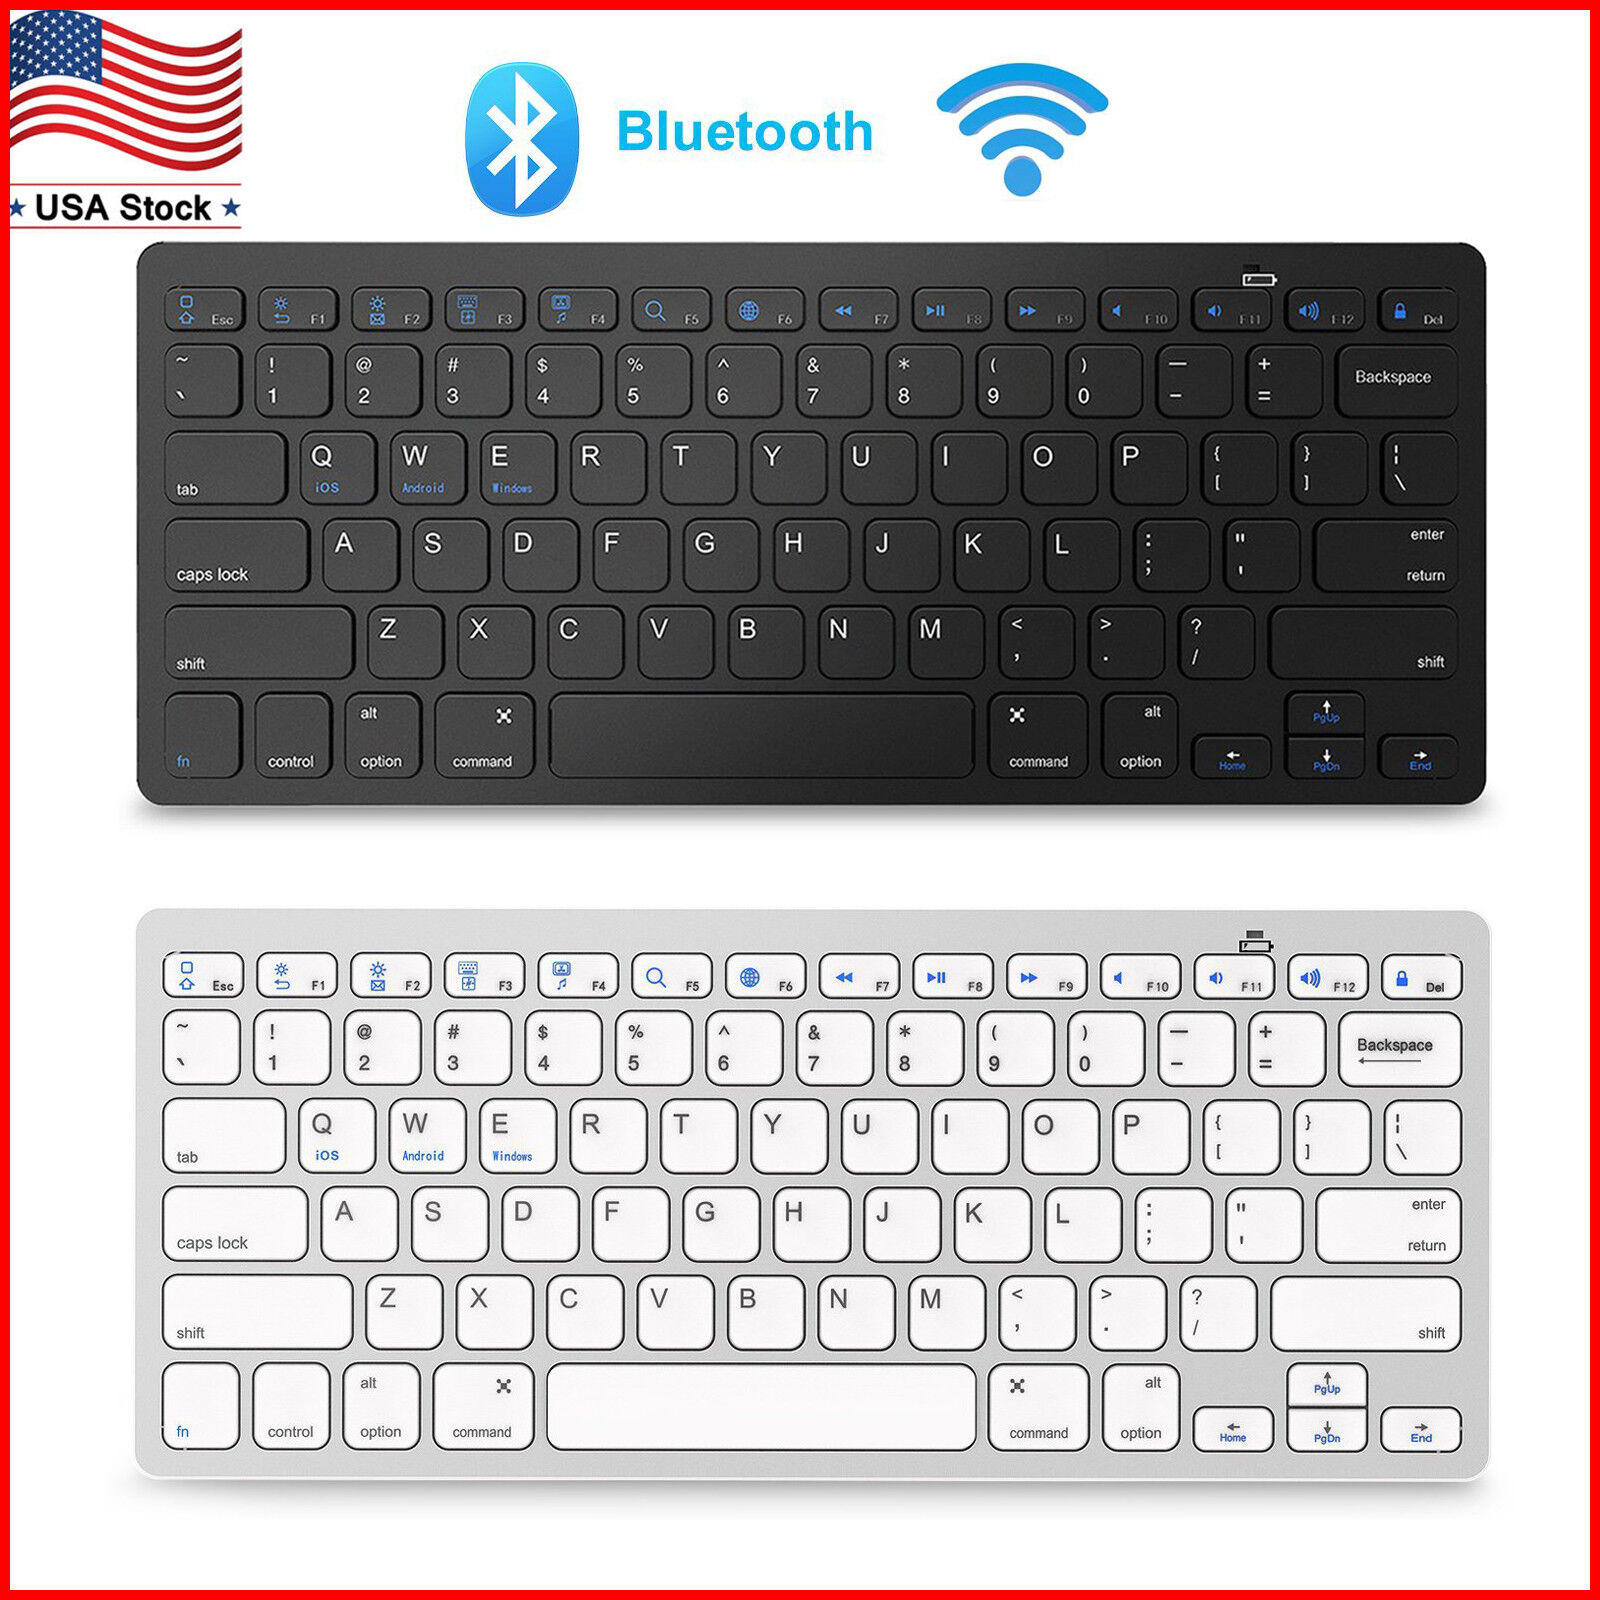 Wireless Bluetooth Keyboard For iOS Android Windows Mac OS PC Tablet Smartphone sunnyshop Does Not Apply